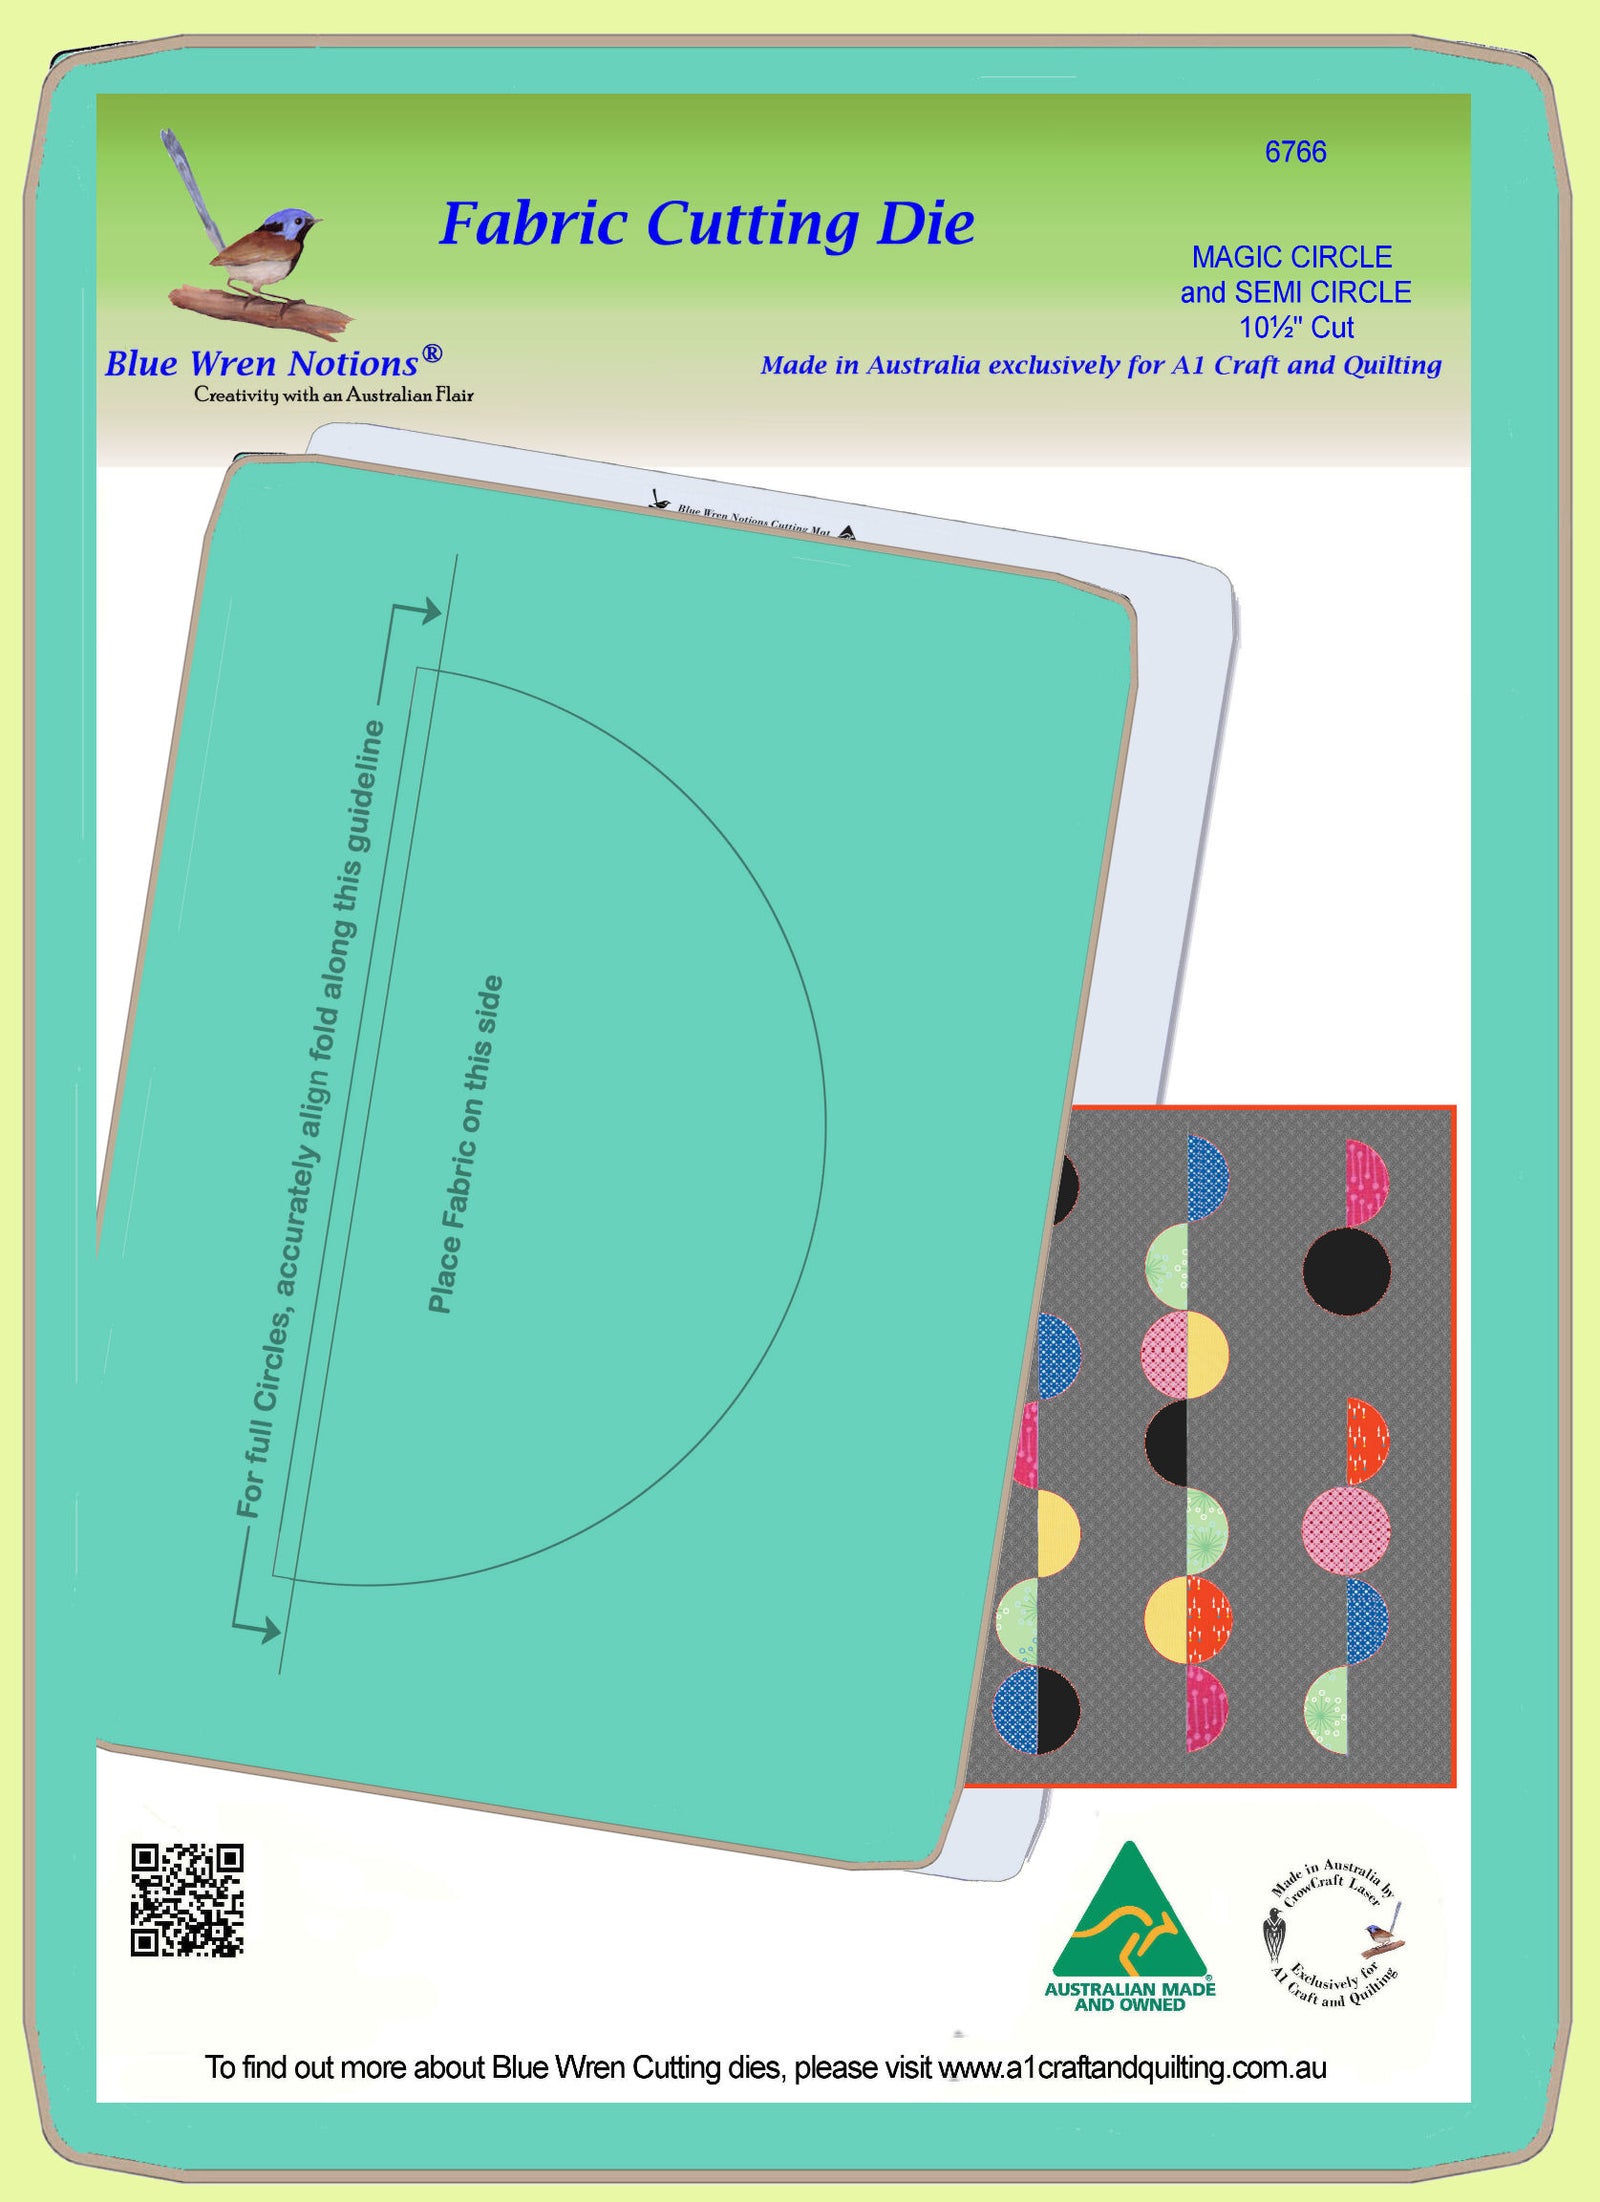 Circle &/or Semicircle 8 Magic Series - 6208 - Mat included - A1 Craft  and Quilting, Australia